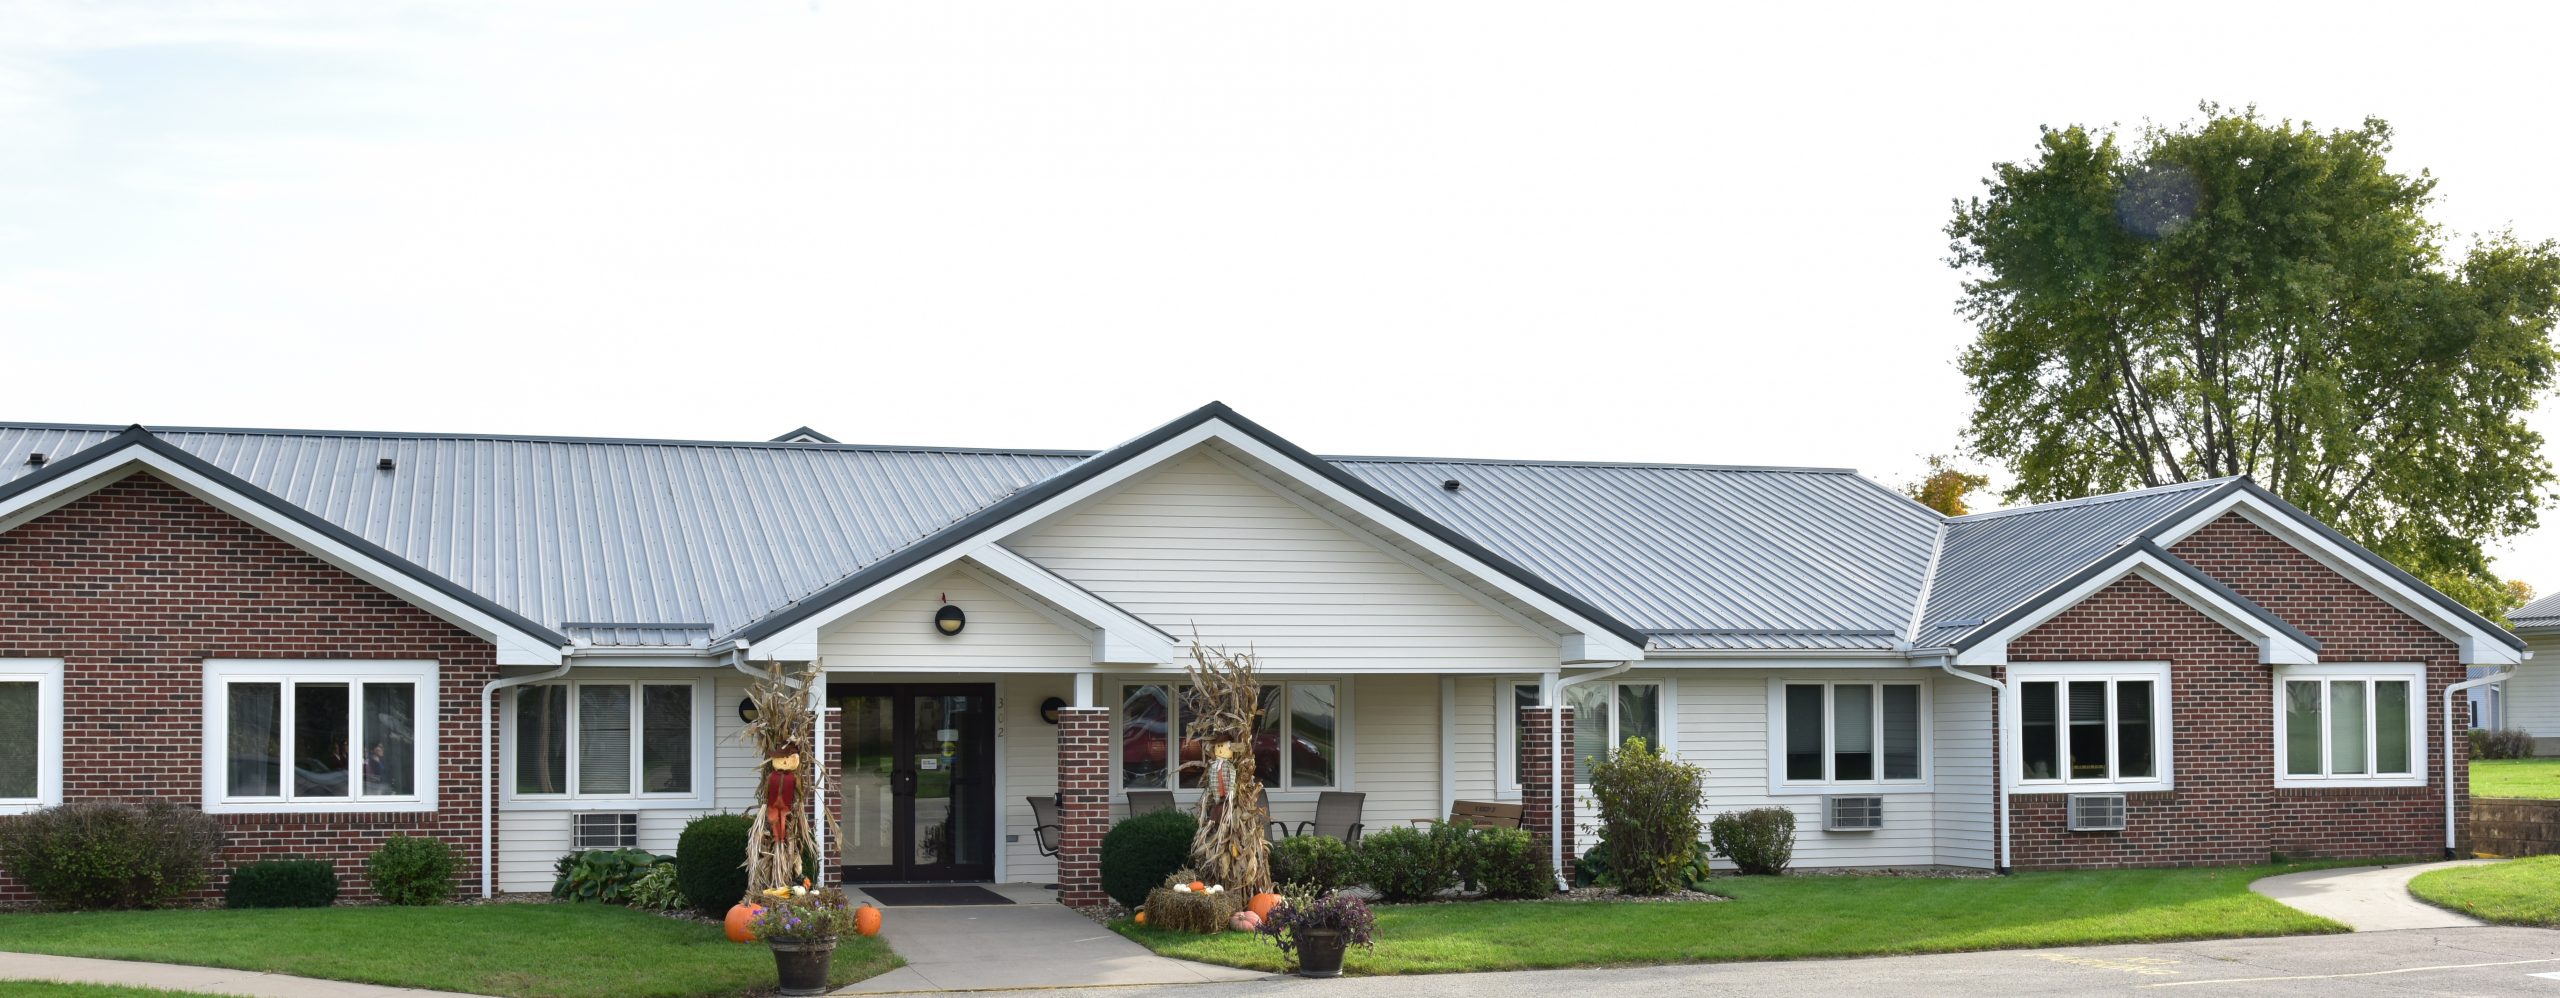 Header image for assisted living displaying front view of a house